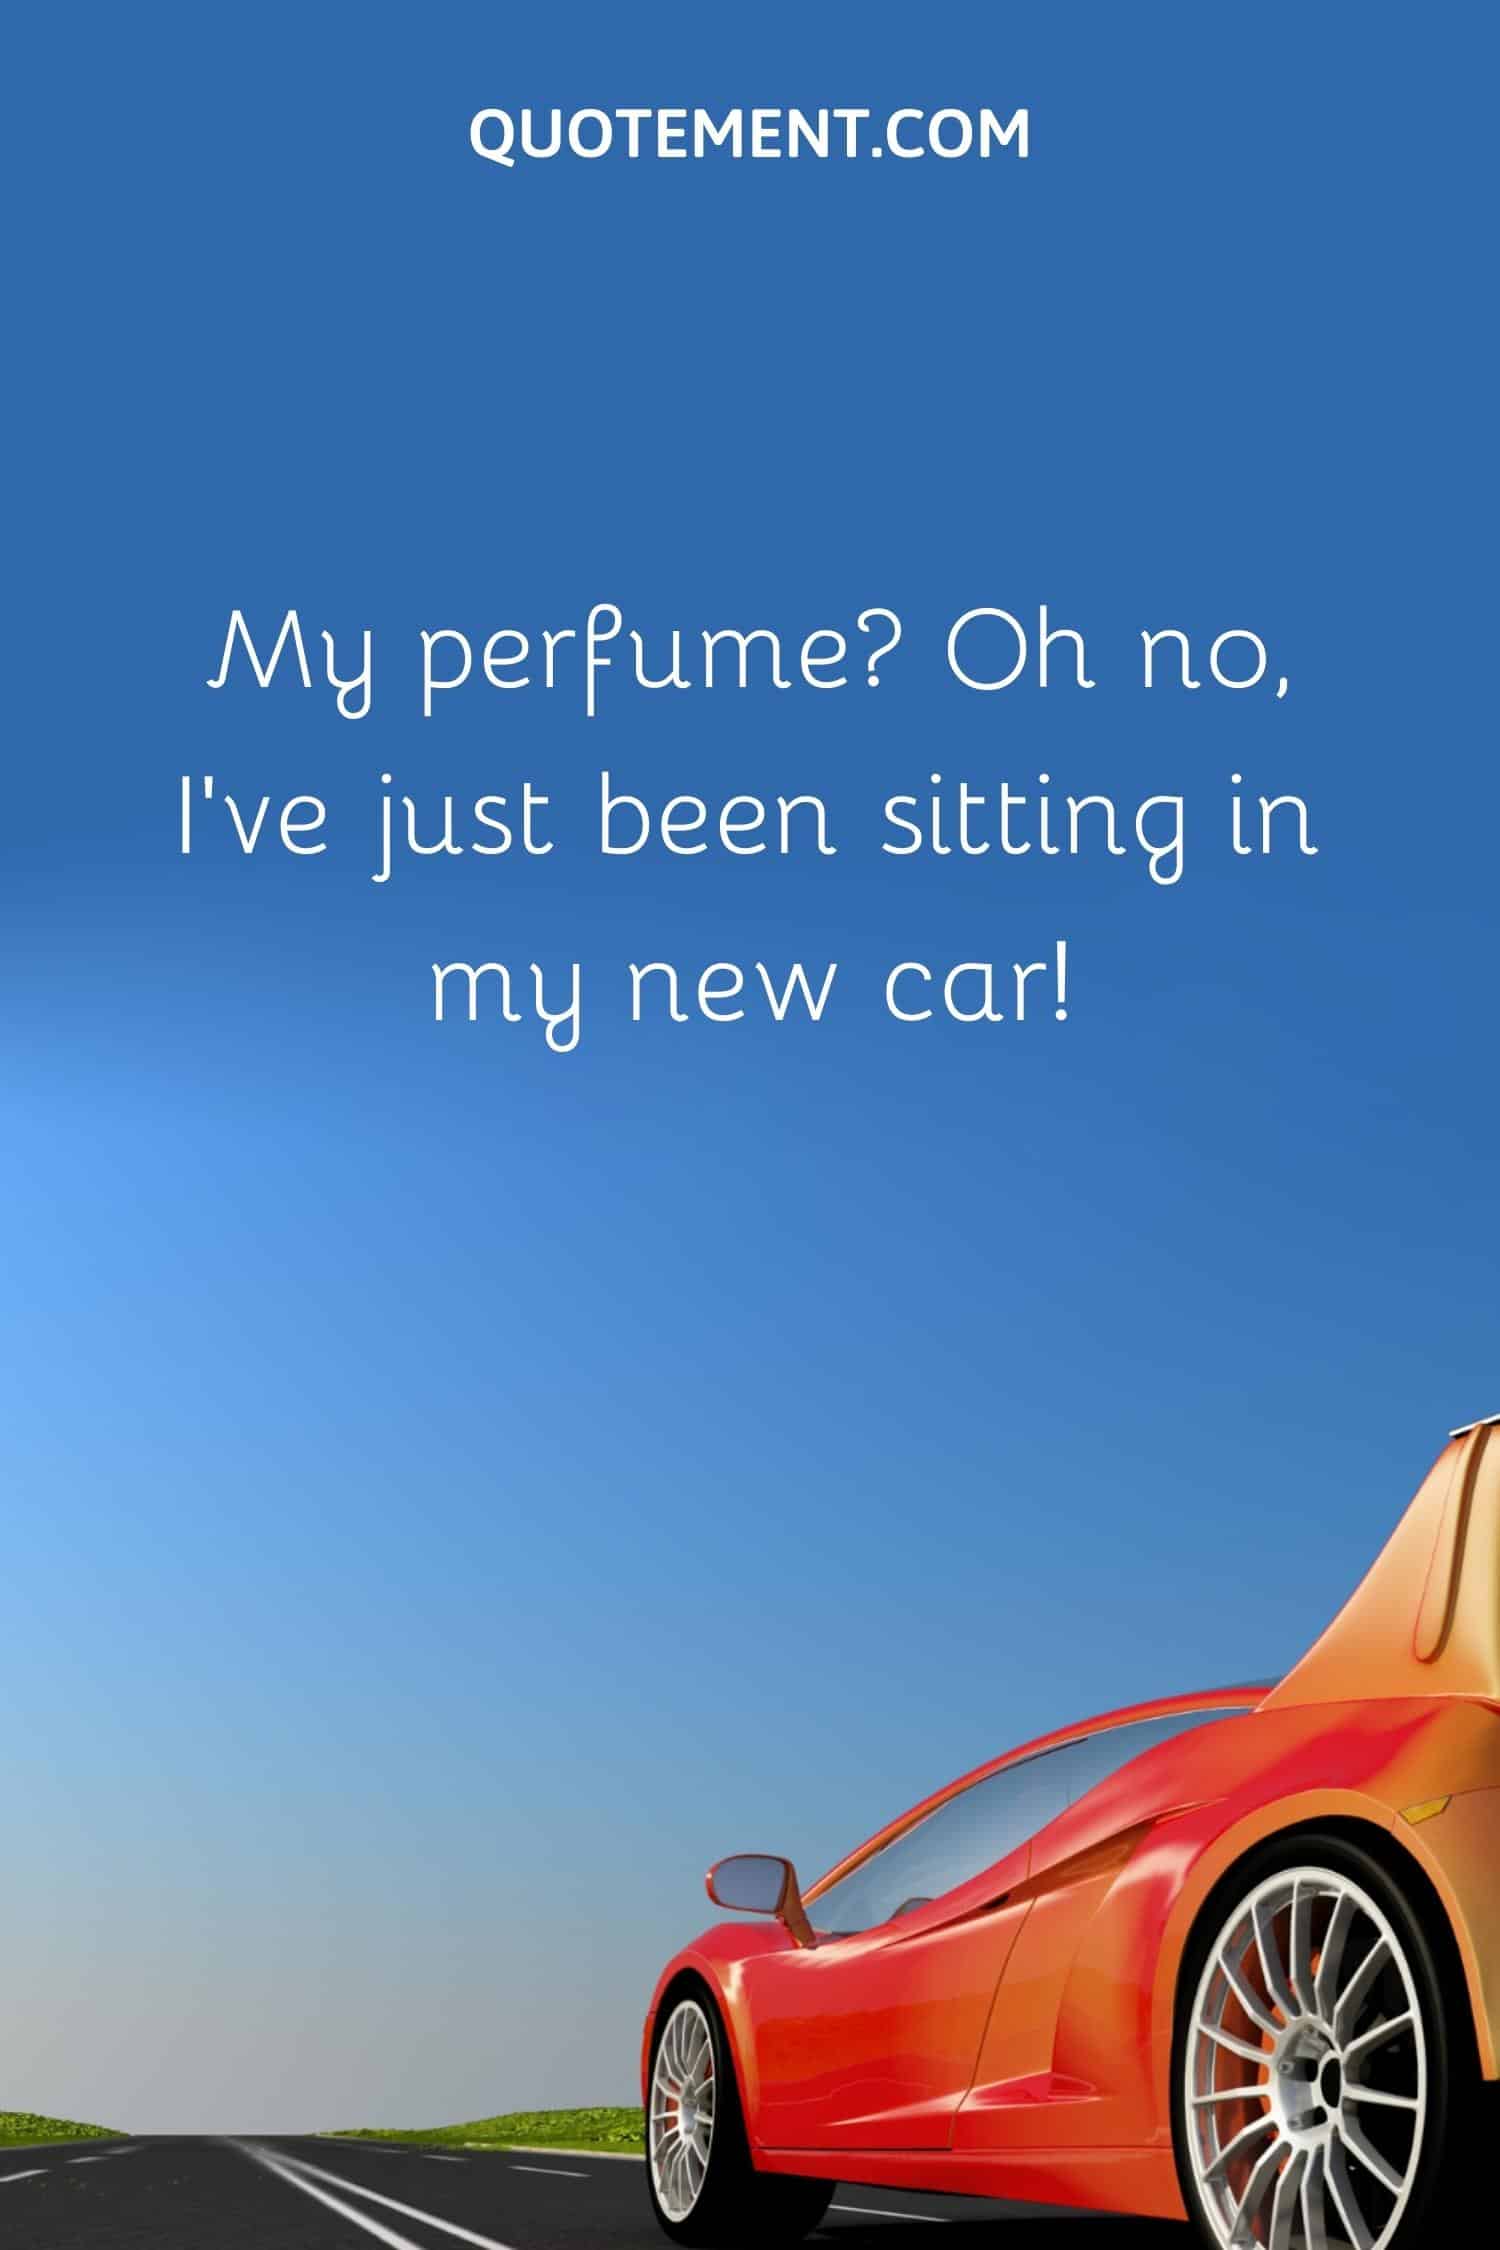 I’ve just been sitting in my new car